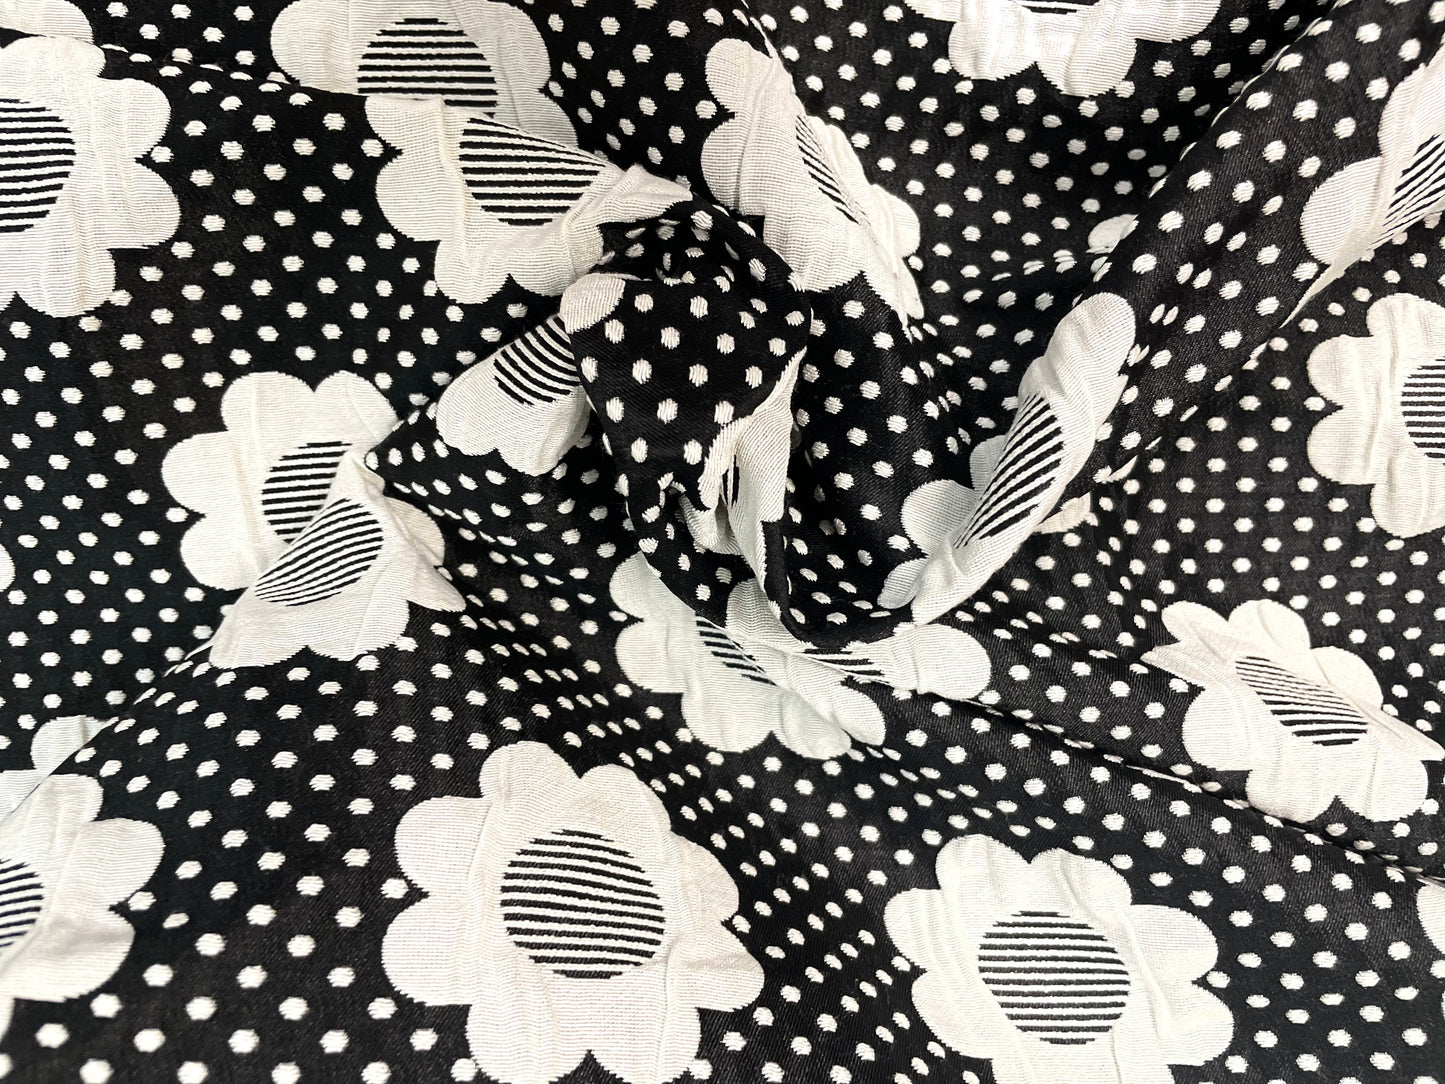 Textured Double Faced Floral Print - Black and White